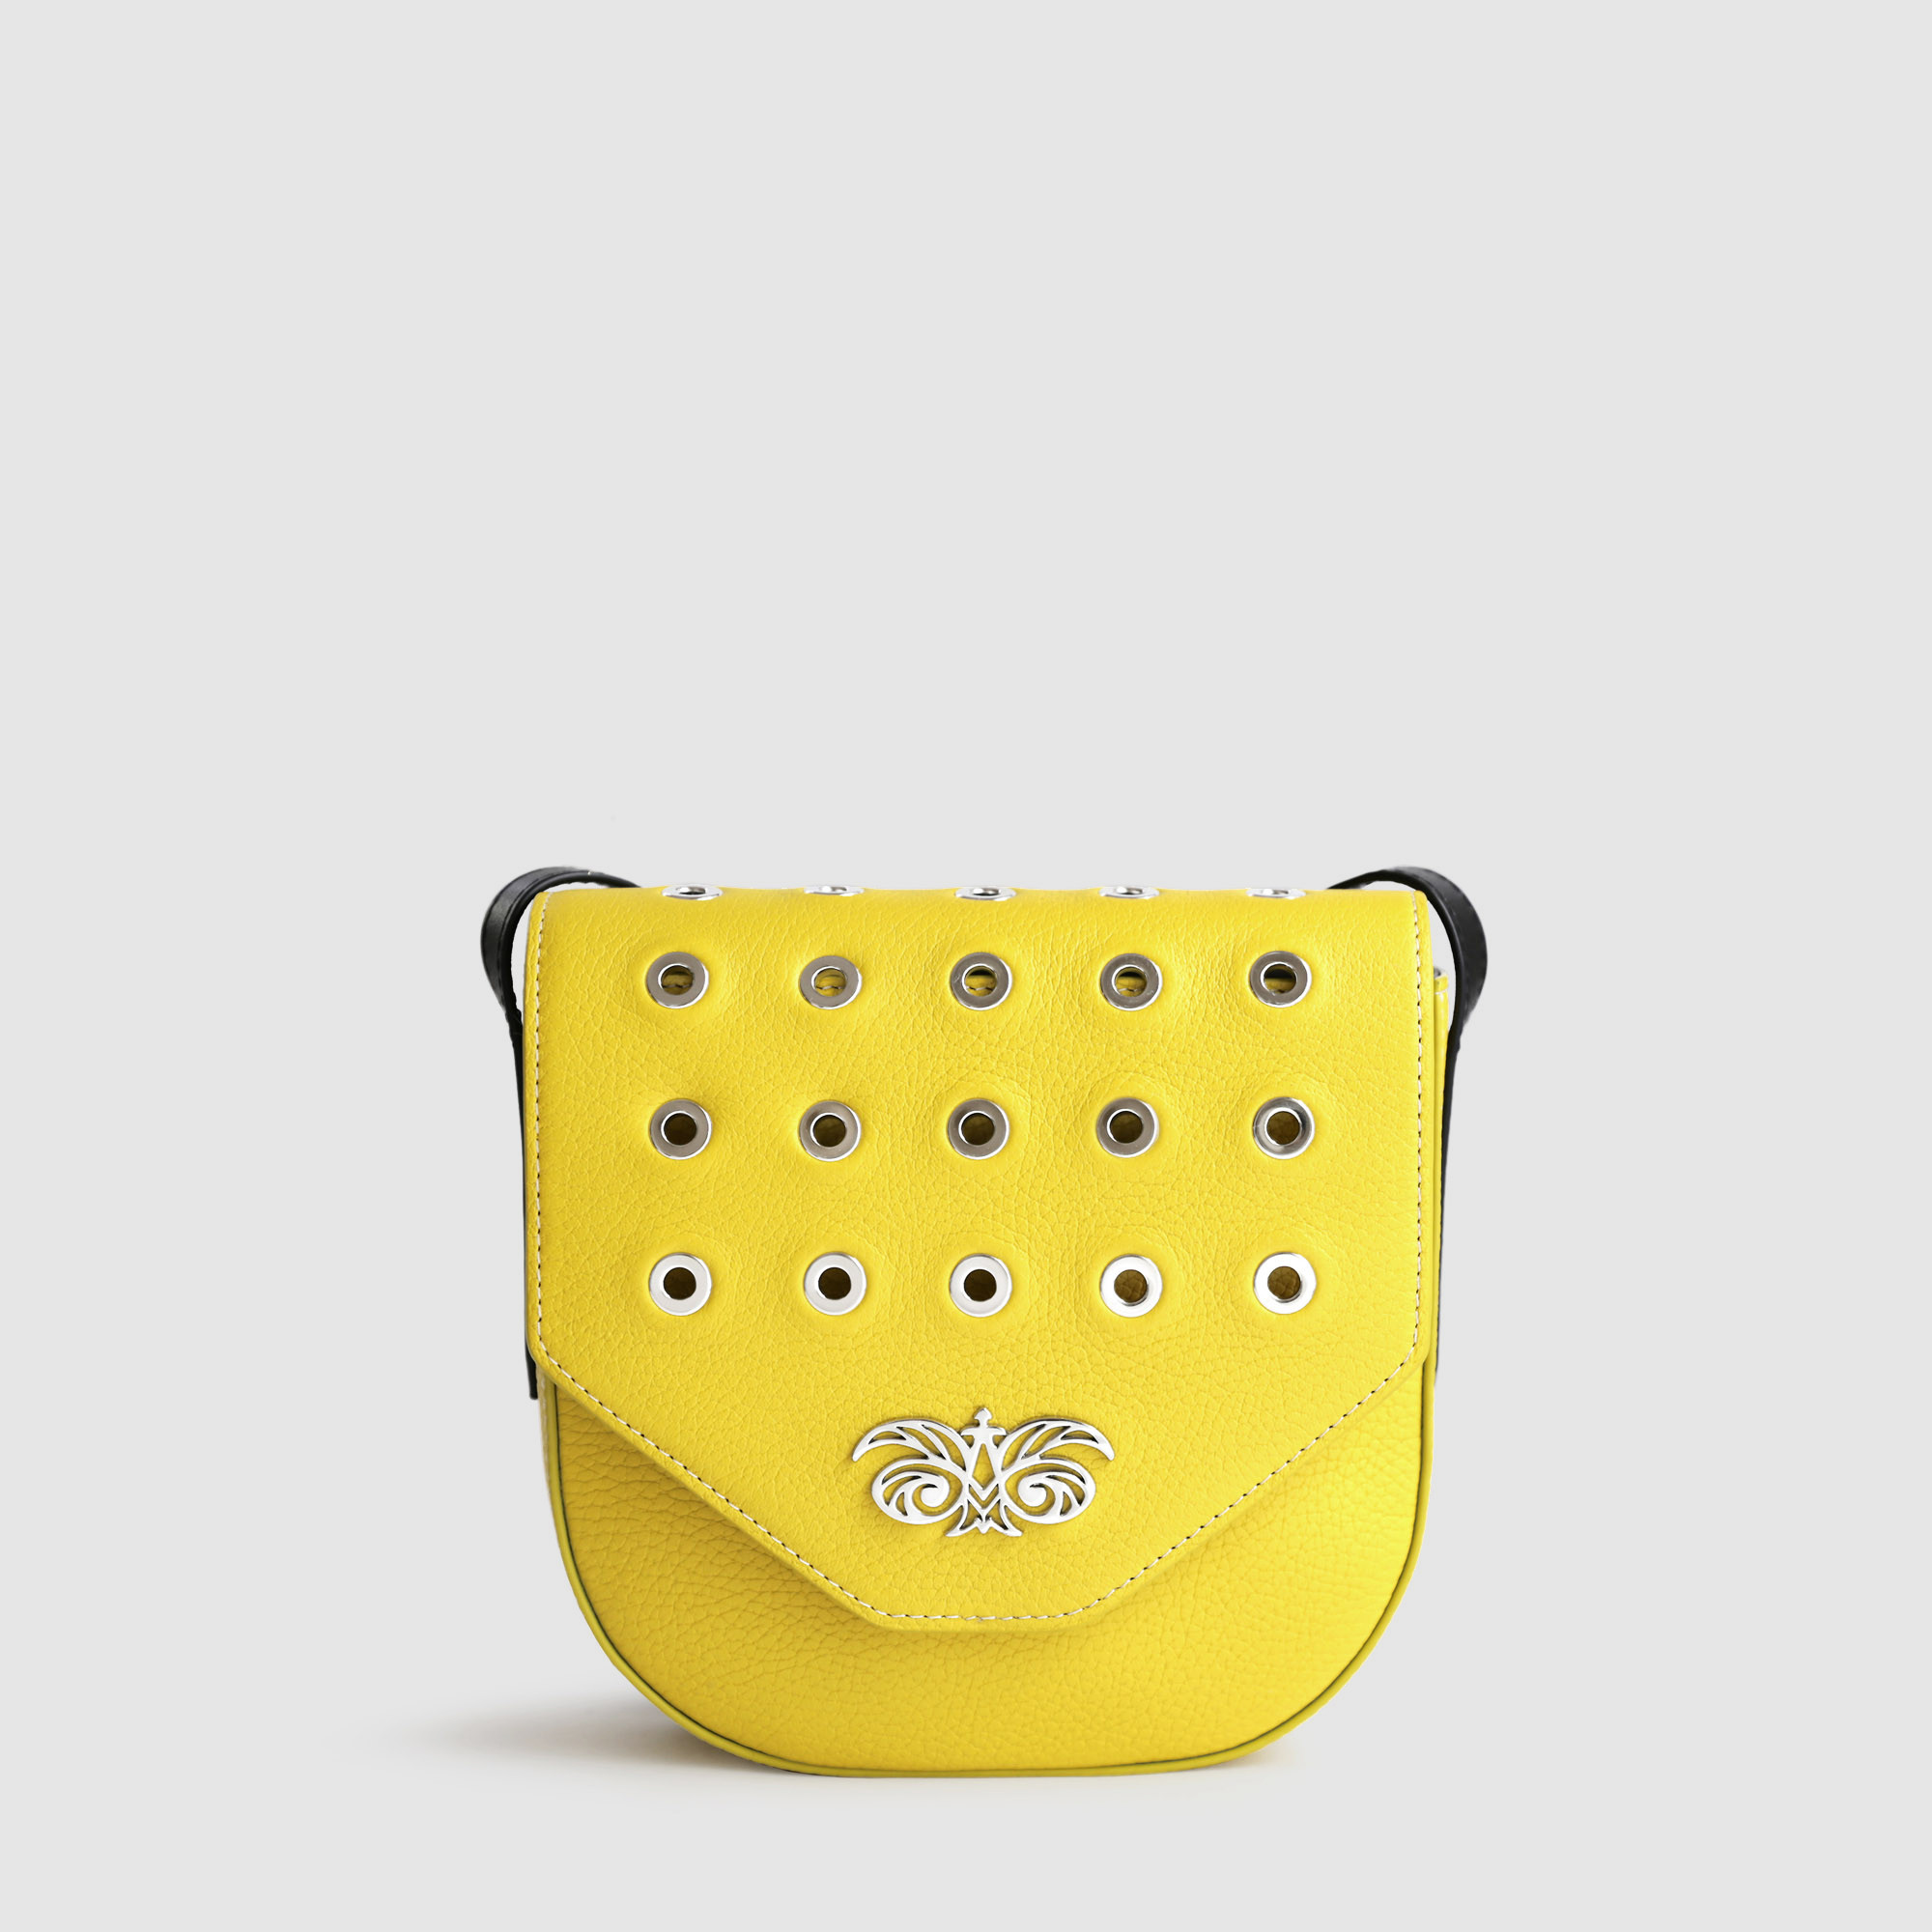 Small shoulder bag DINA ROCK in grained leather, yellow color - front view - grey background